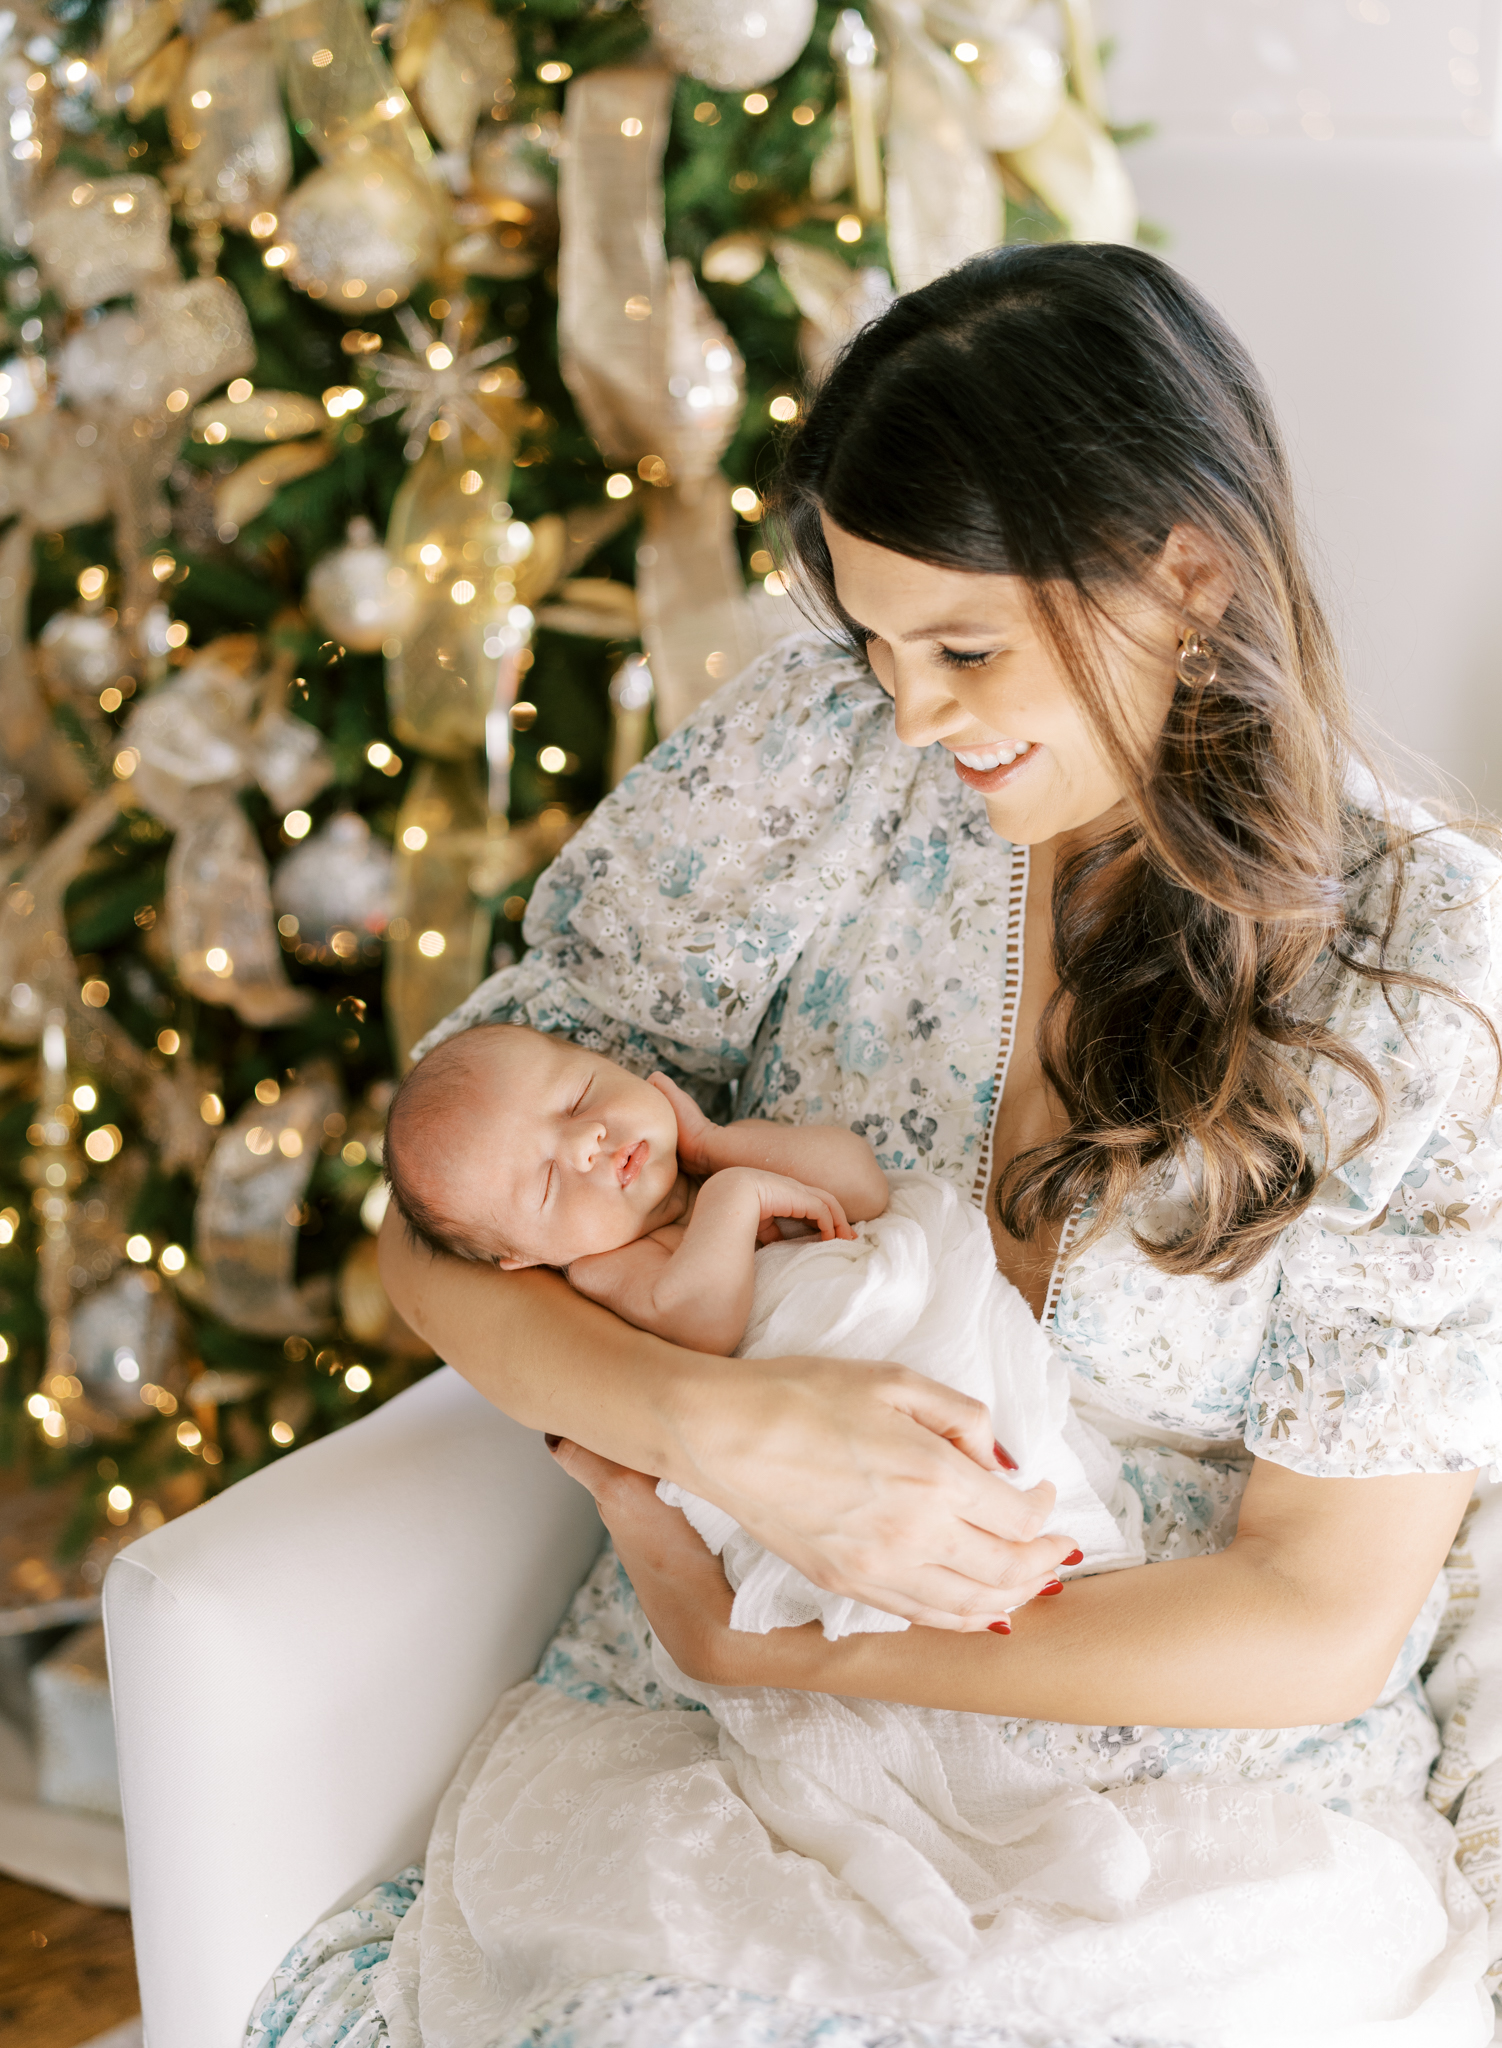 New mom adoring her baby boy in front of the lit Christmas tree. 